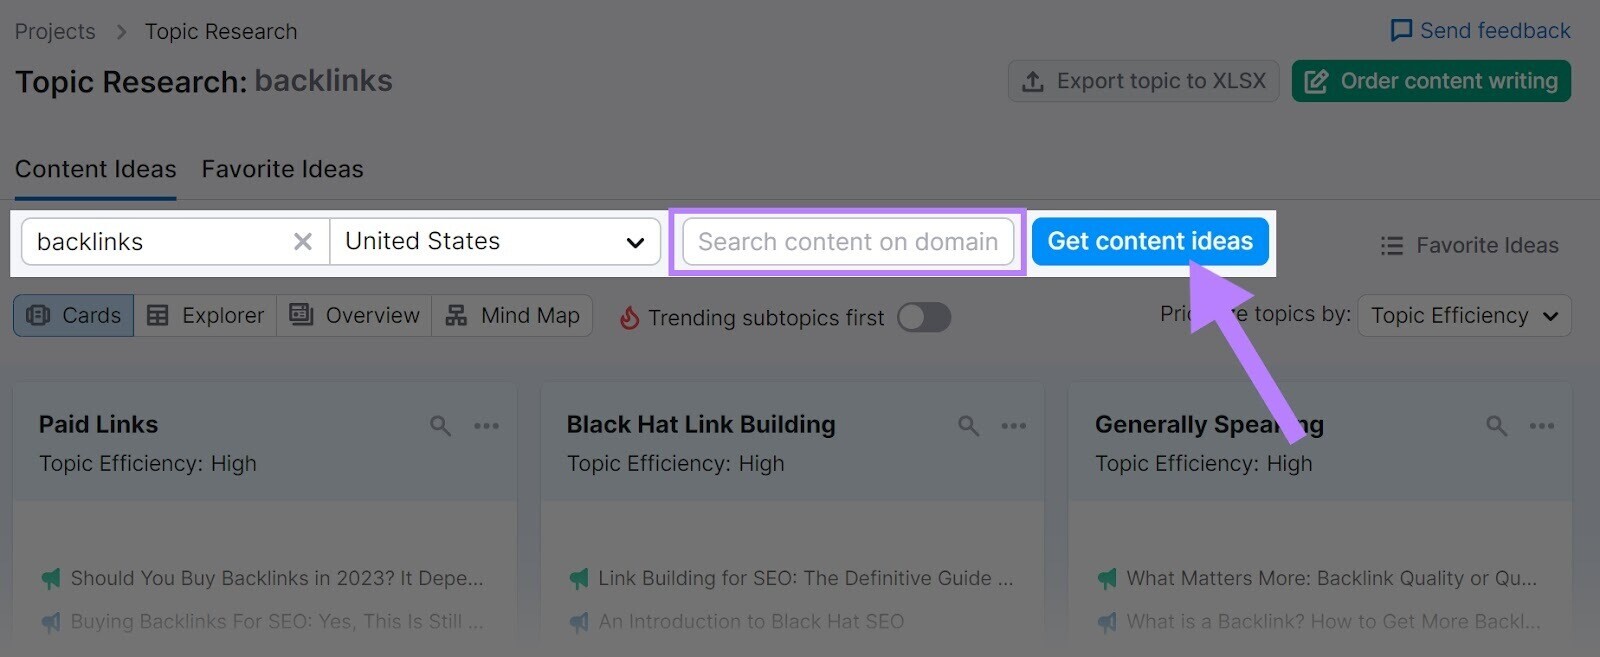 “Get content ideas” button highlighted